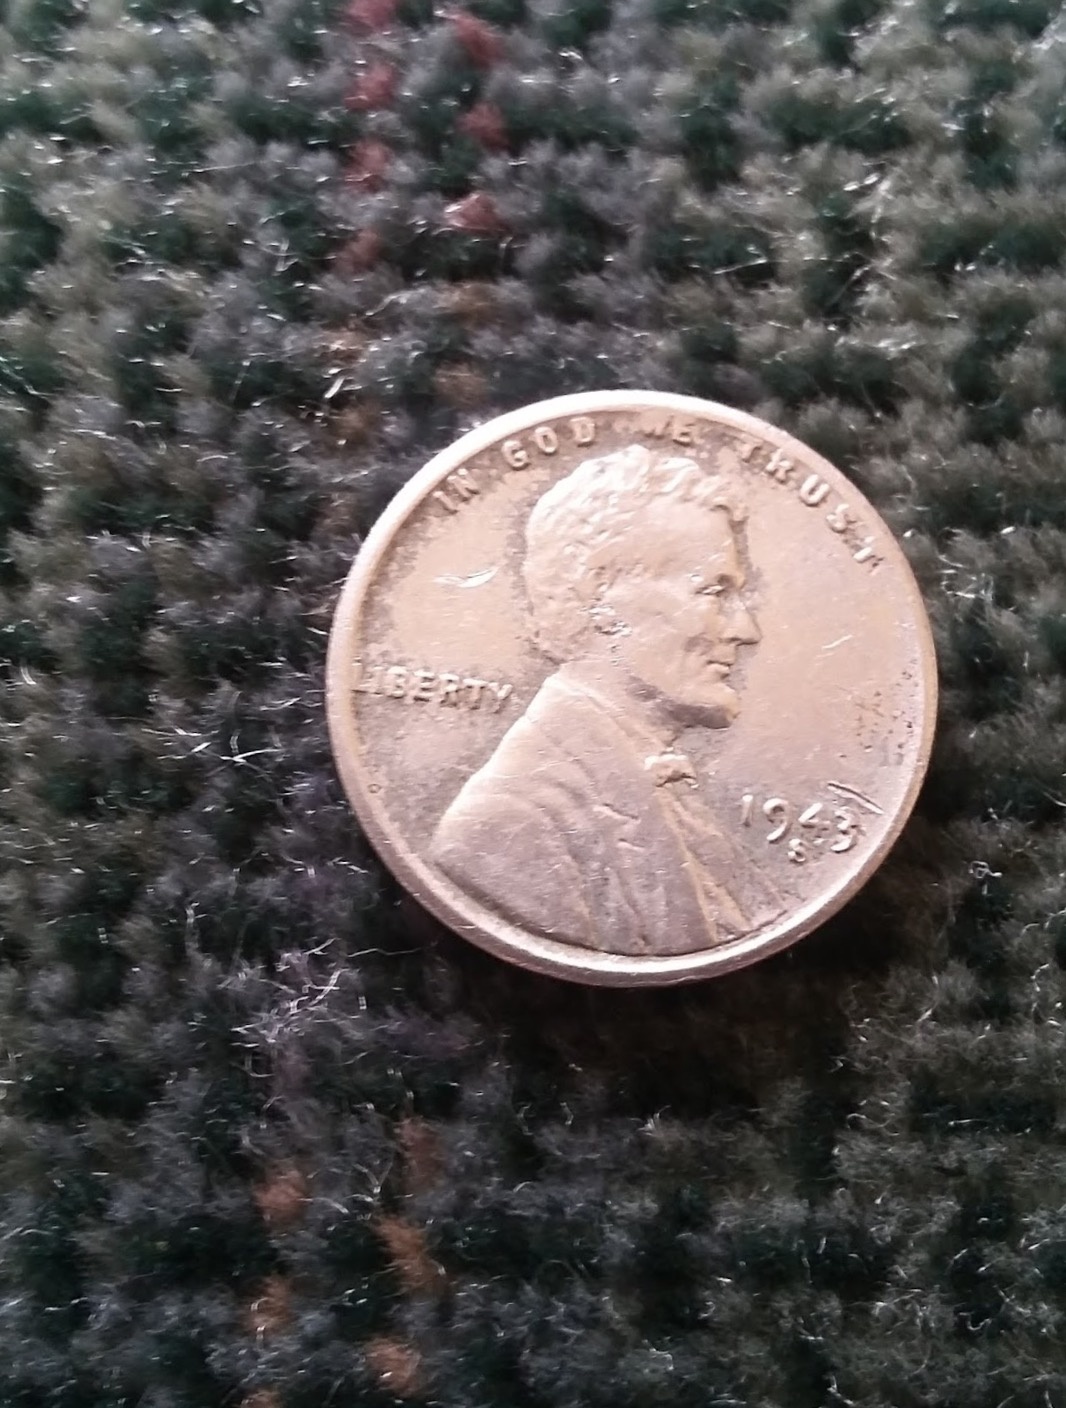 Is there an organization for people who deal in old and rare coins?